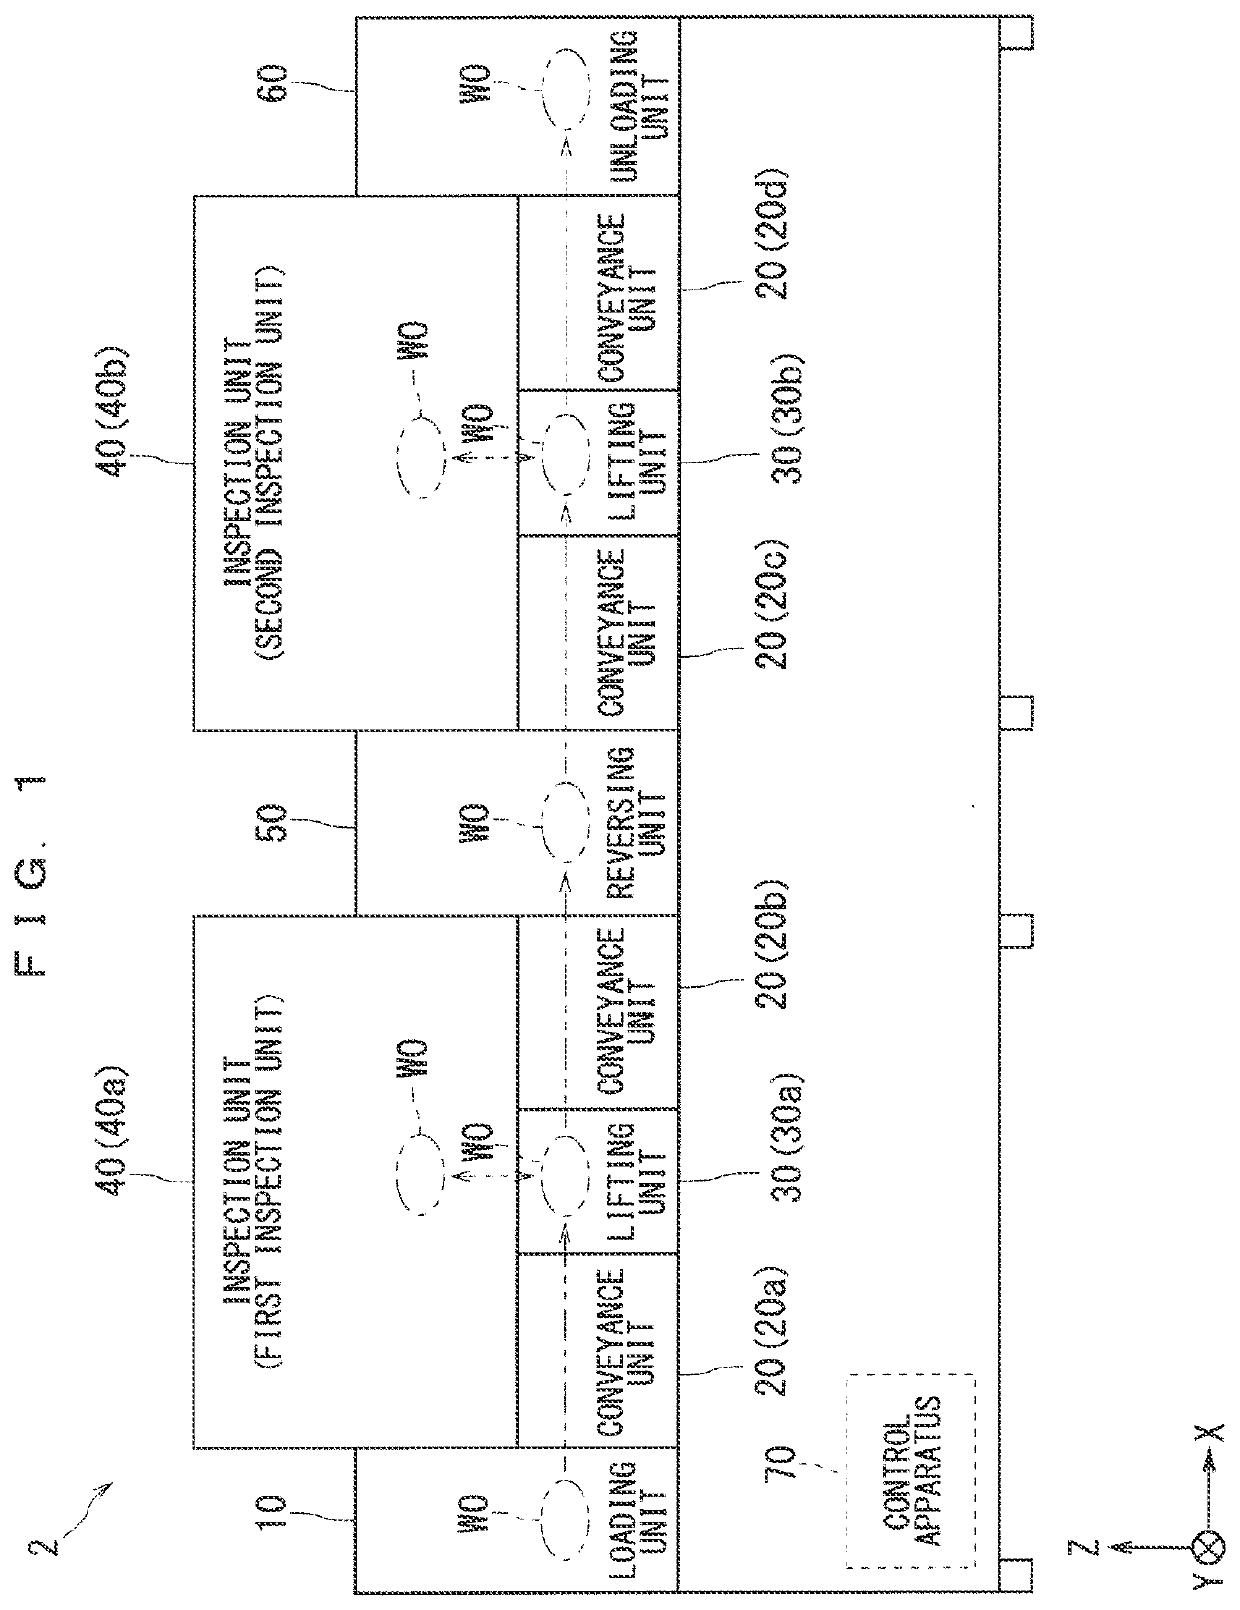 Image processing apparatus, image processing method, inspection apparatus, and non-transitory computer readable recording medium